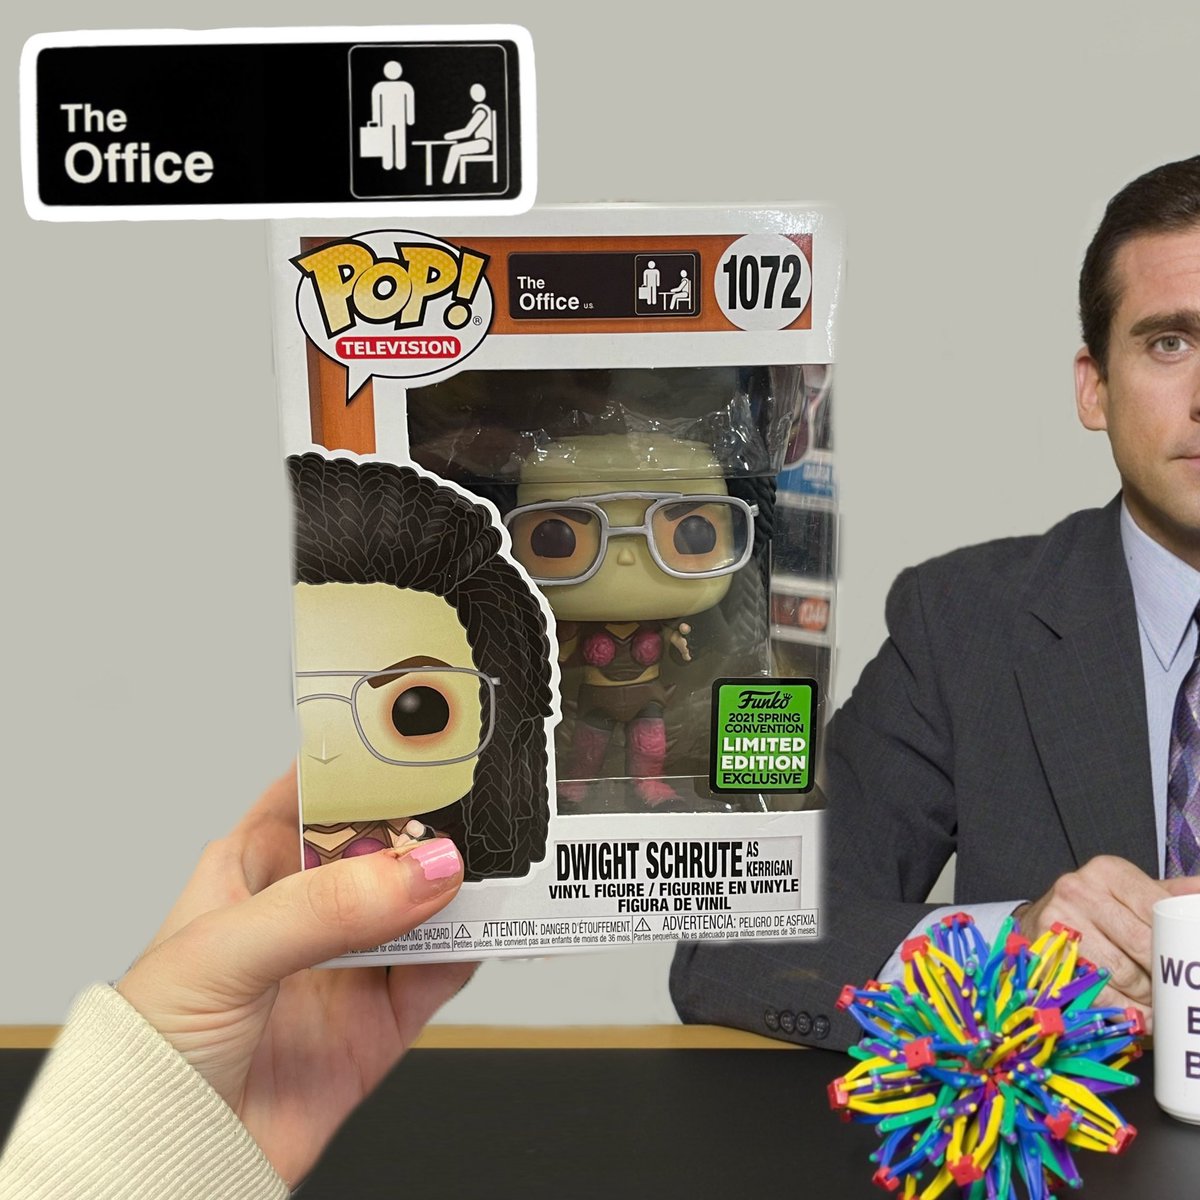 💼 THE OFFICE 💼 “Where Dwight?” “I think you know where” 😎 Spring Convention exclusive Dwight as Kerrigan Office POP vinyl has landed! 🫡 #theoffice #theofficeus #dwightschrute @FunkoEurope